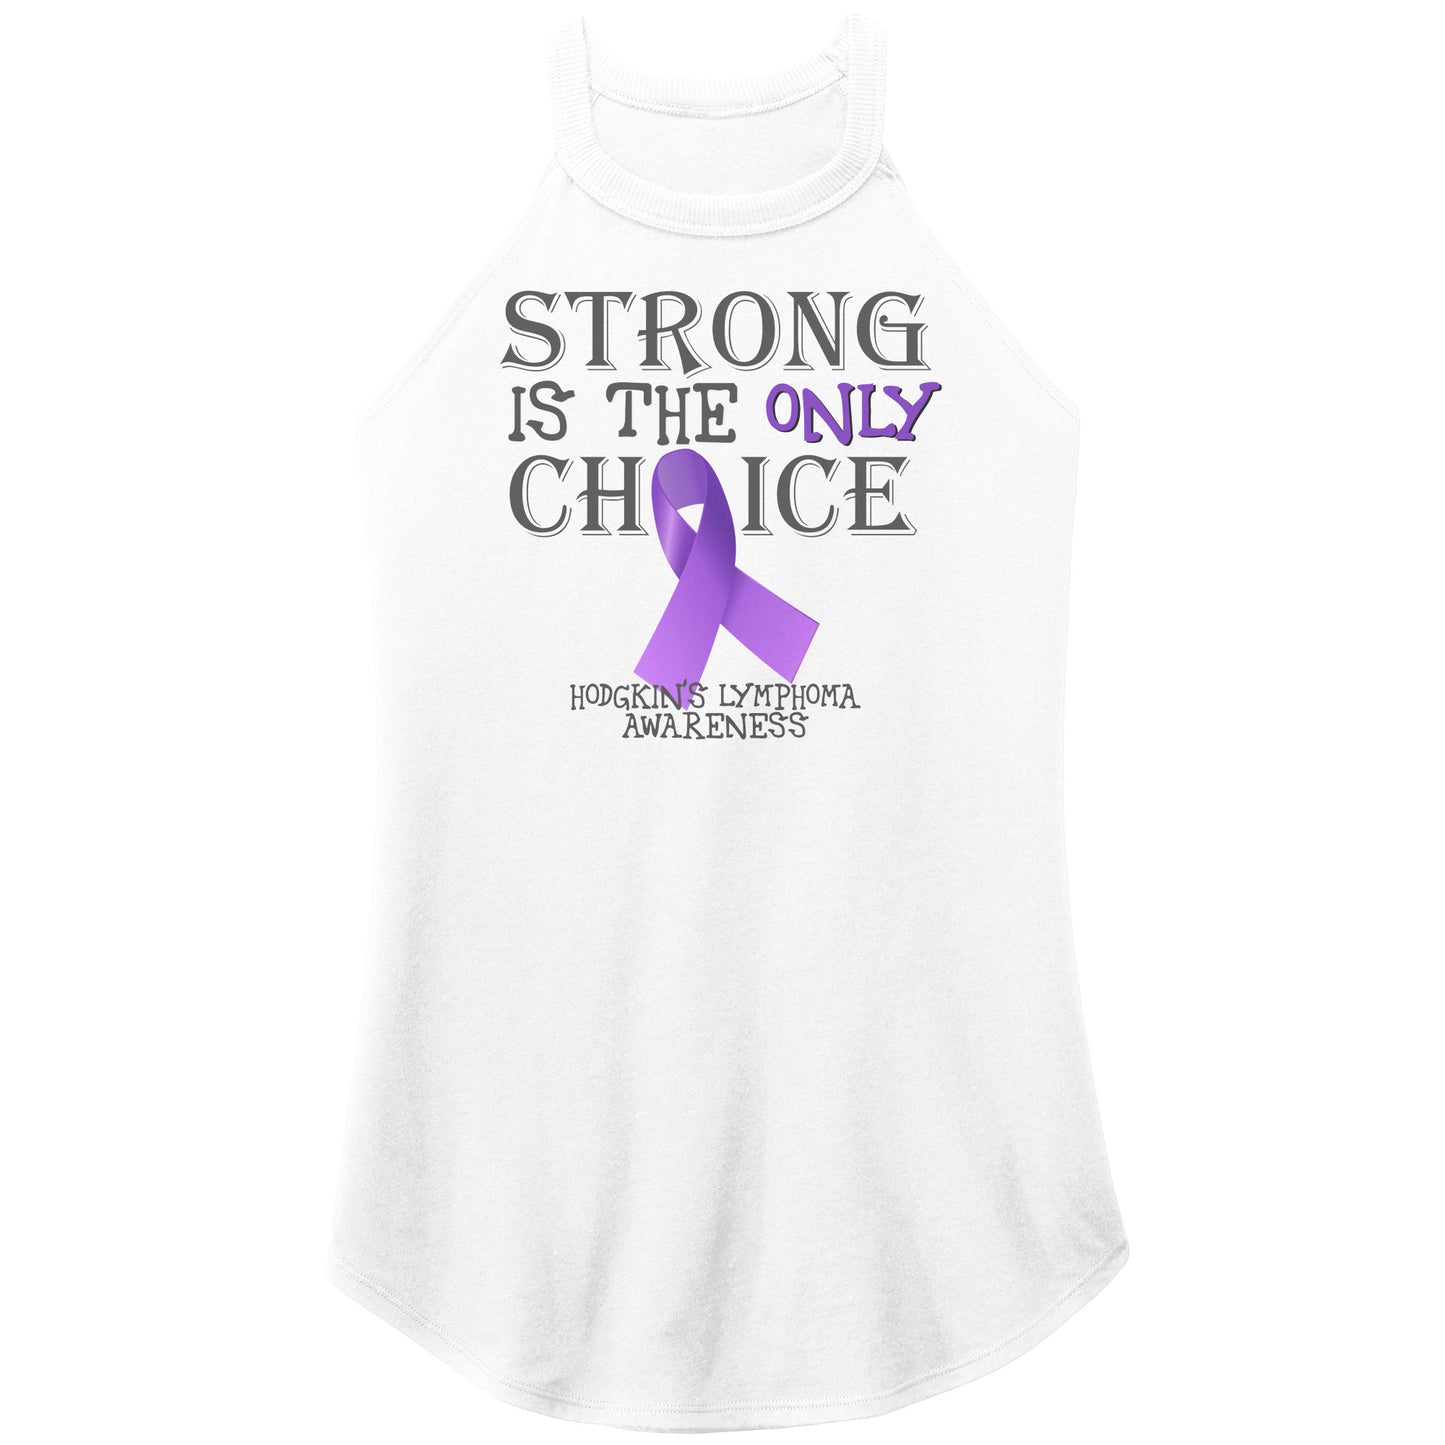 Strong is the Only Choice -Hodgkin's Lymphoma Awareness T-Shirt, Hoodie, Tank